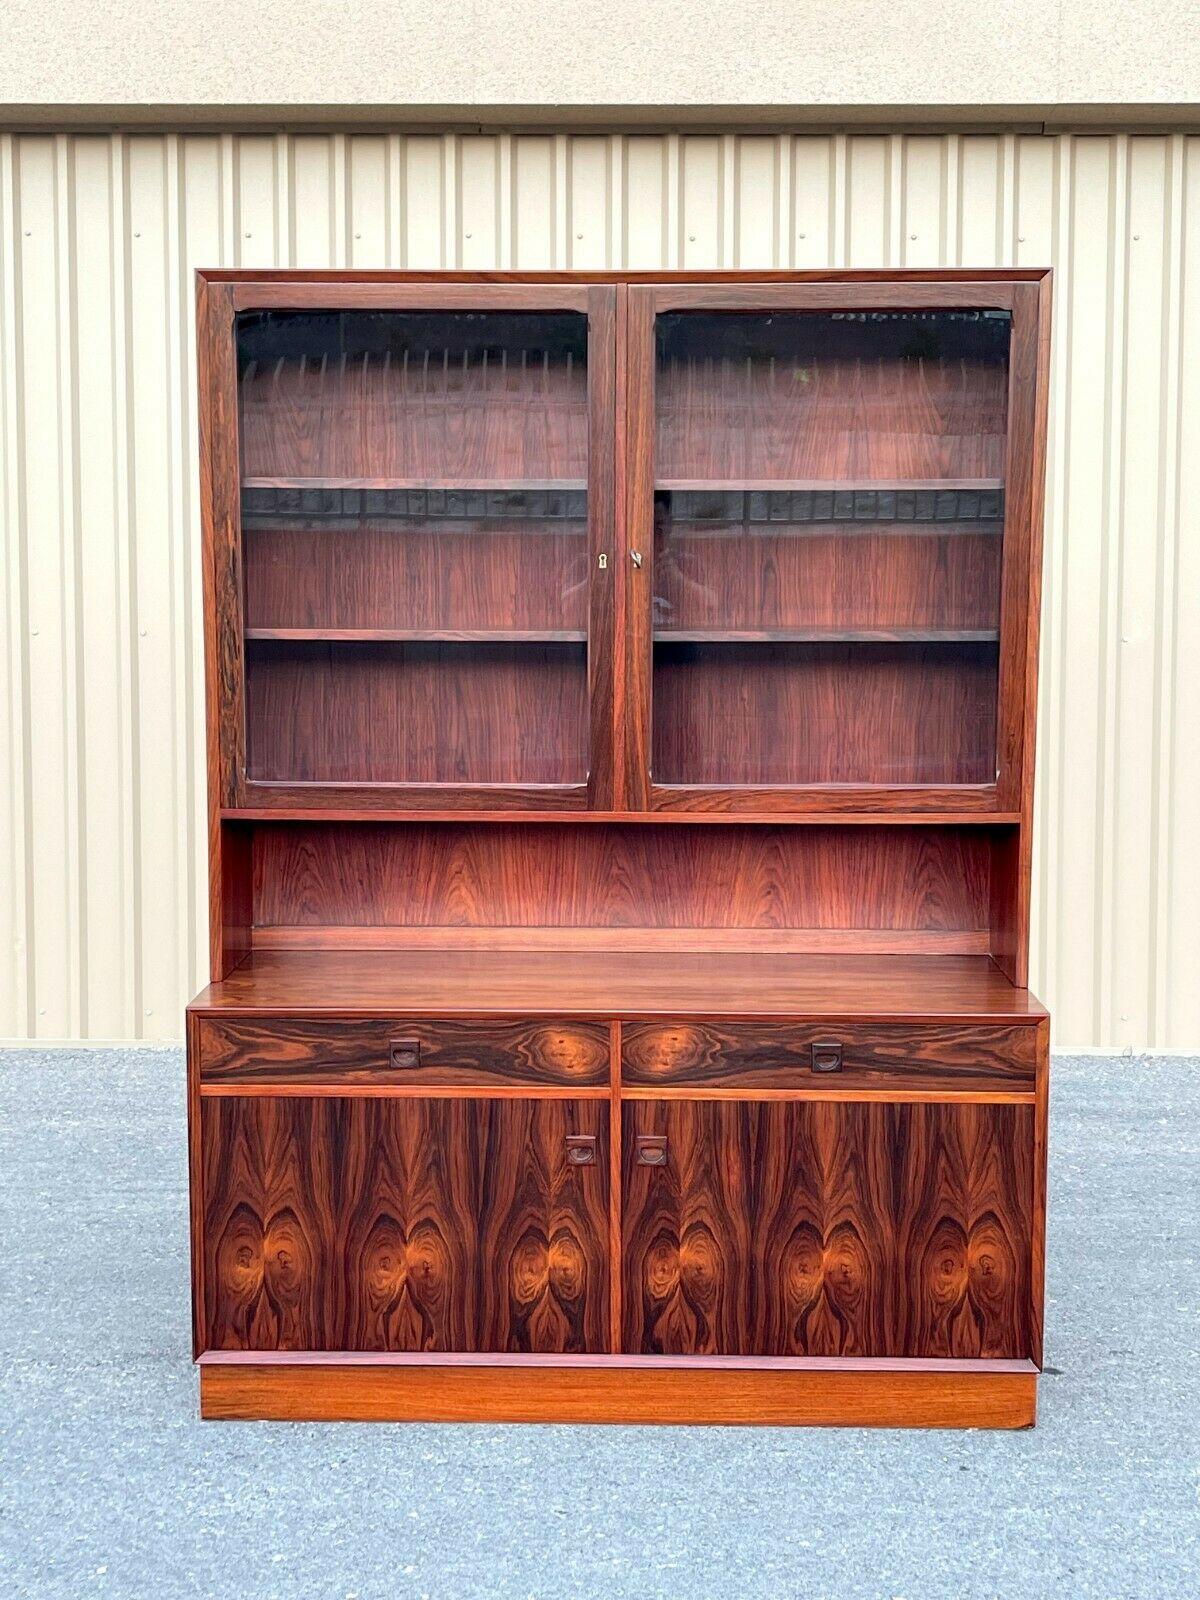 A Beautiful large Danish modern rosewood display cabinet in 2 parts, designed by Erik Brouer for Brouer Møbelfabrik, Denmark, in the 1970s. It has very stunning wood grain and is refined in every detail. It is very beautifully made with 2 cabinet